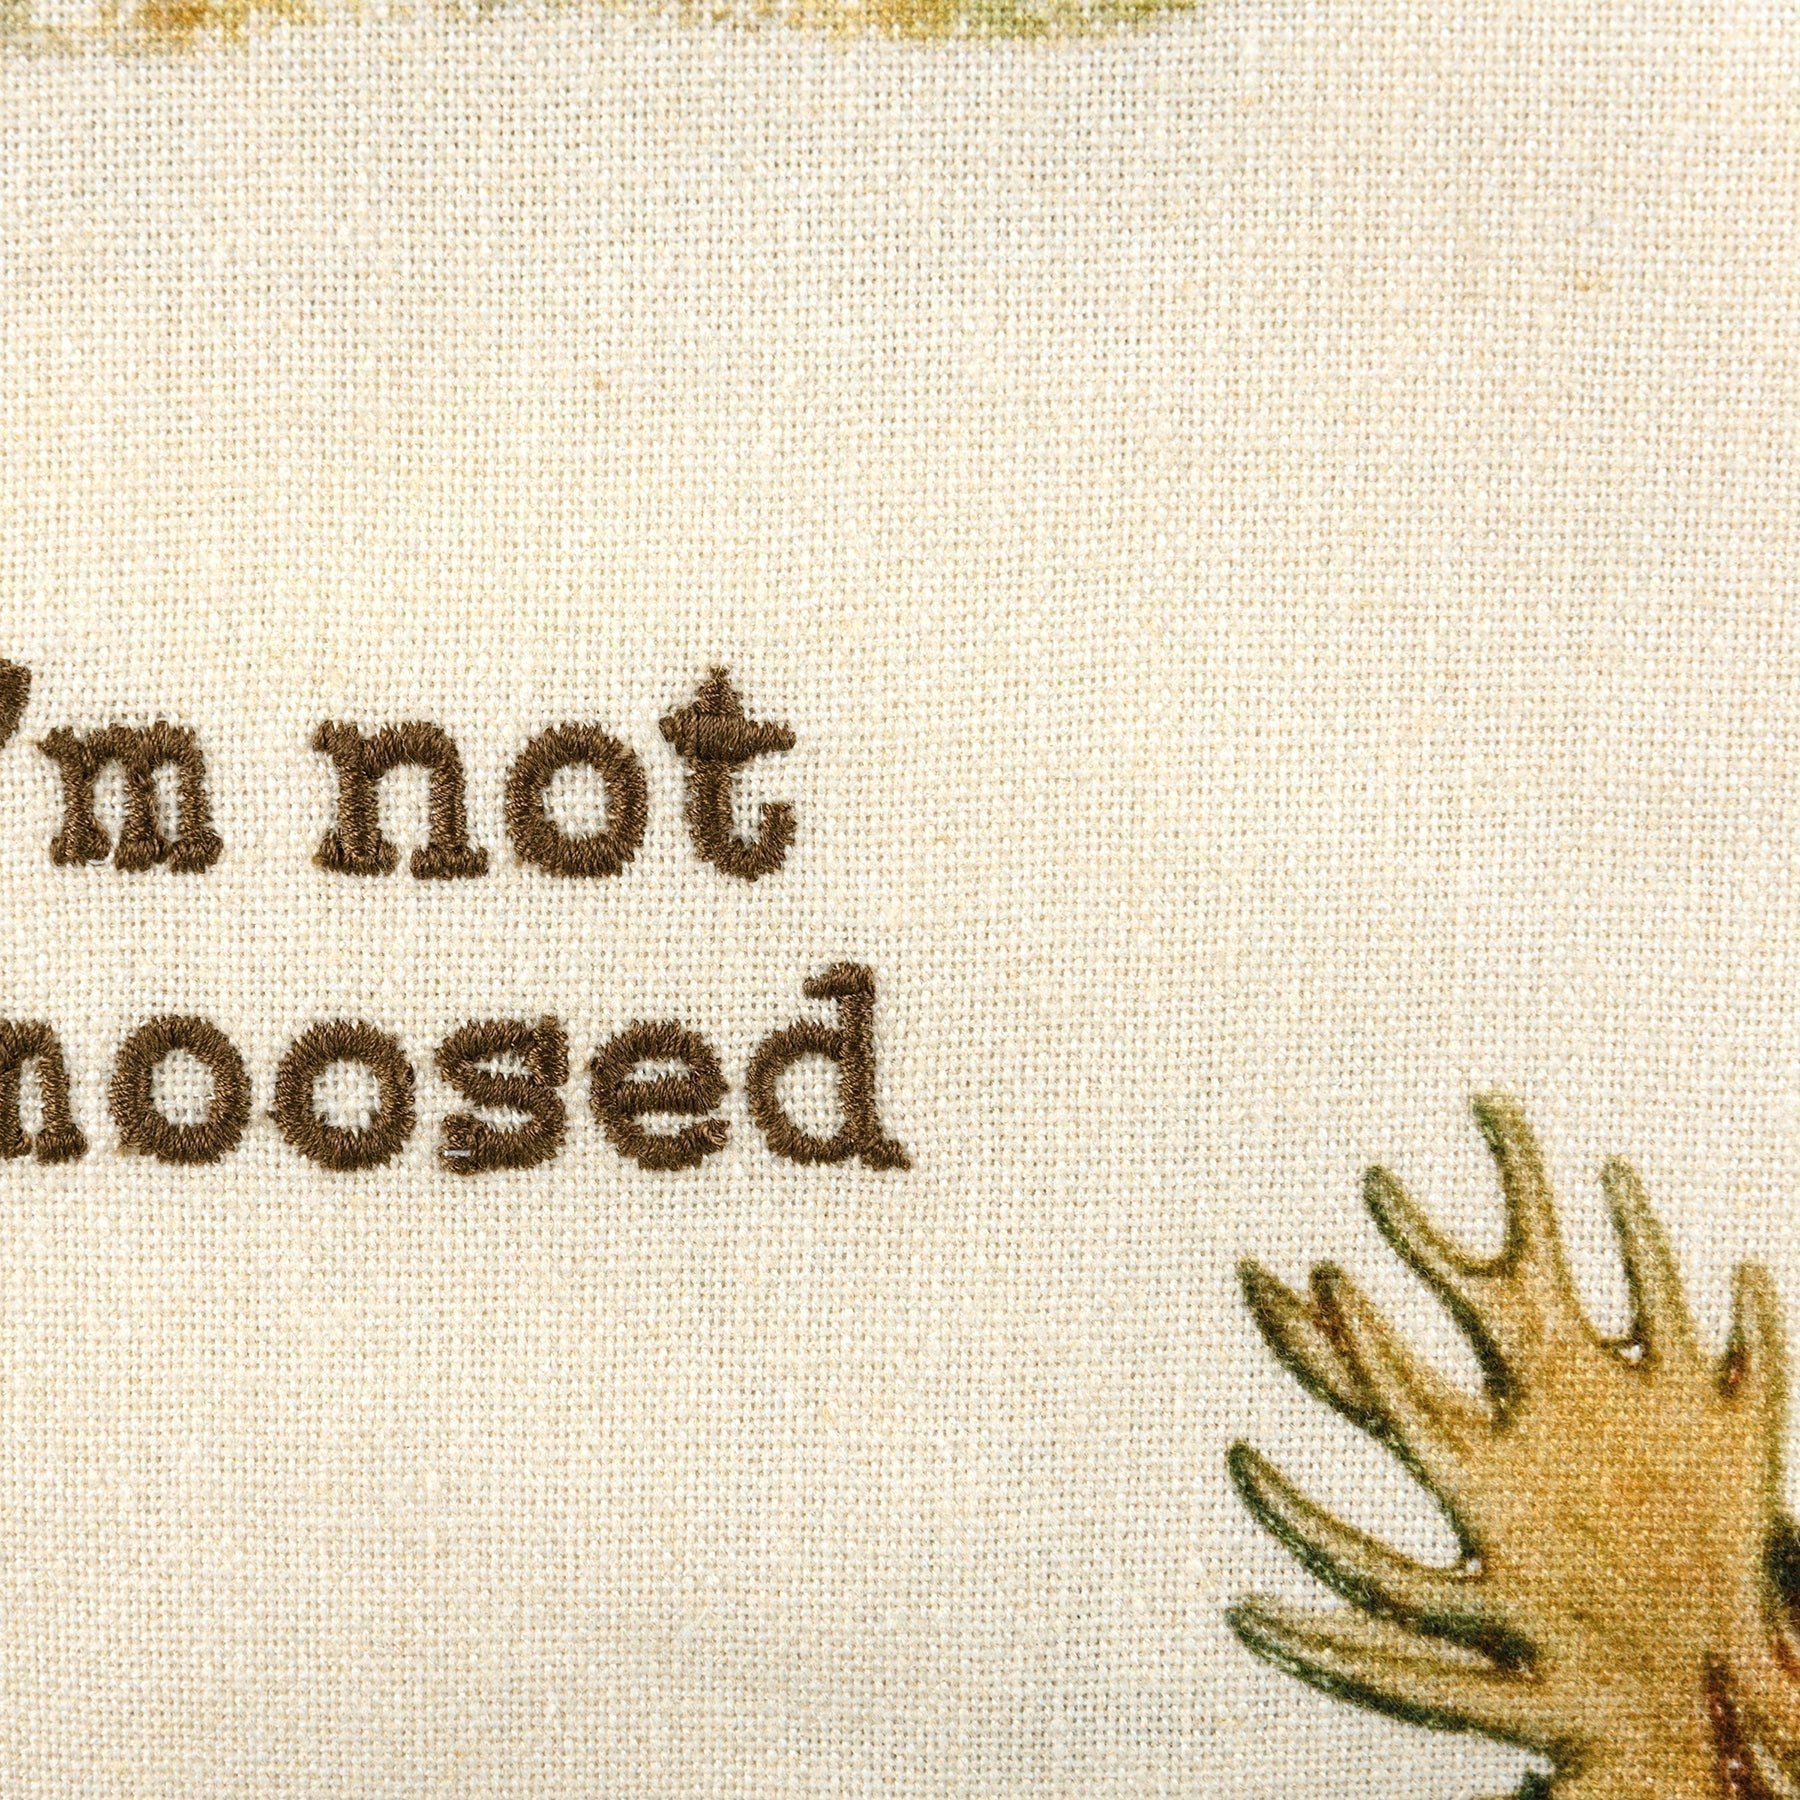 I'm Not Amoosed Moose Dish Cloth Towel | Cotten Linen Novelty Tea Towel | Embroidered Text | 18" x 28"